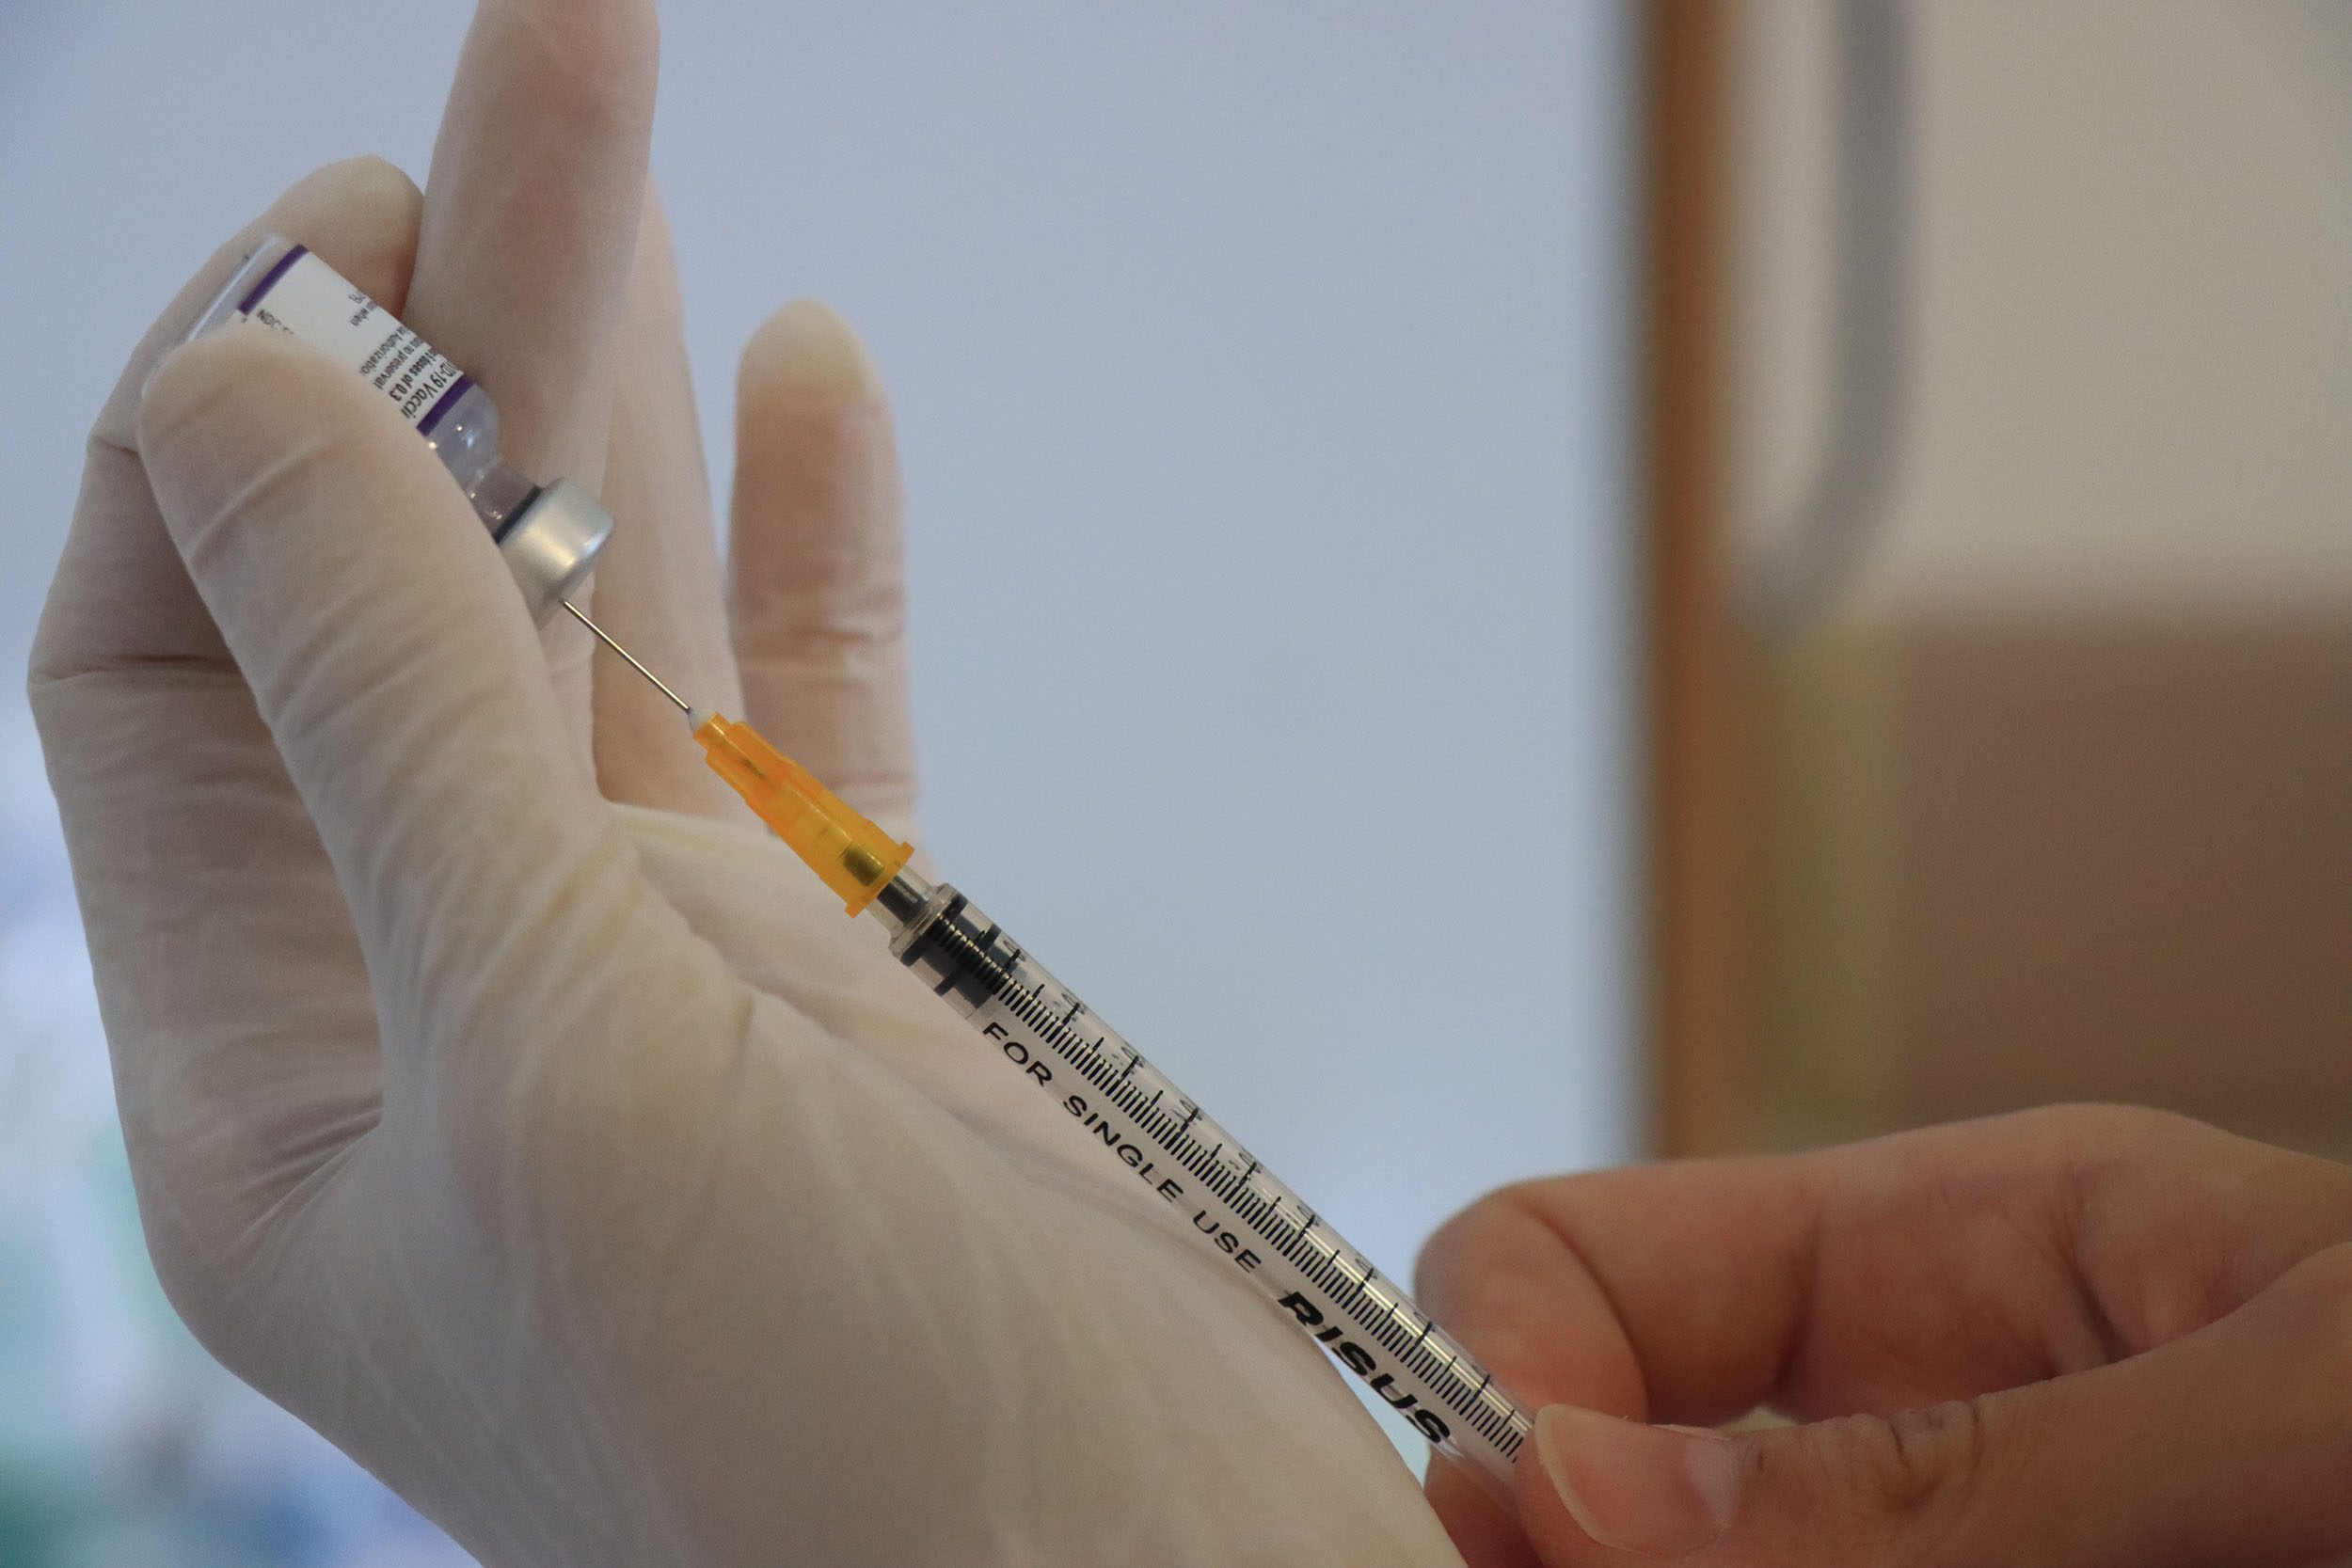 More than 52 million people have been fully vaccinated in Turkey